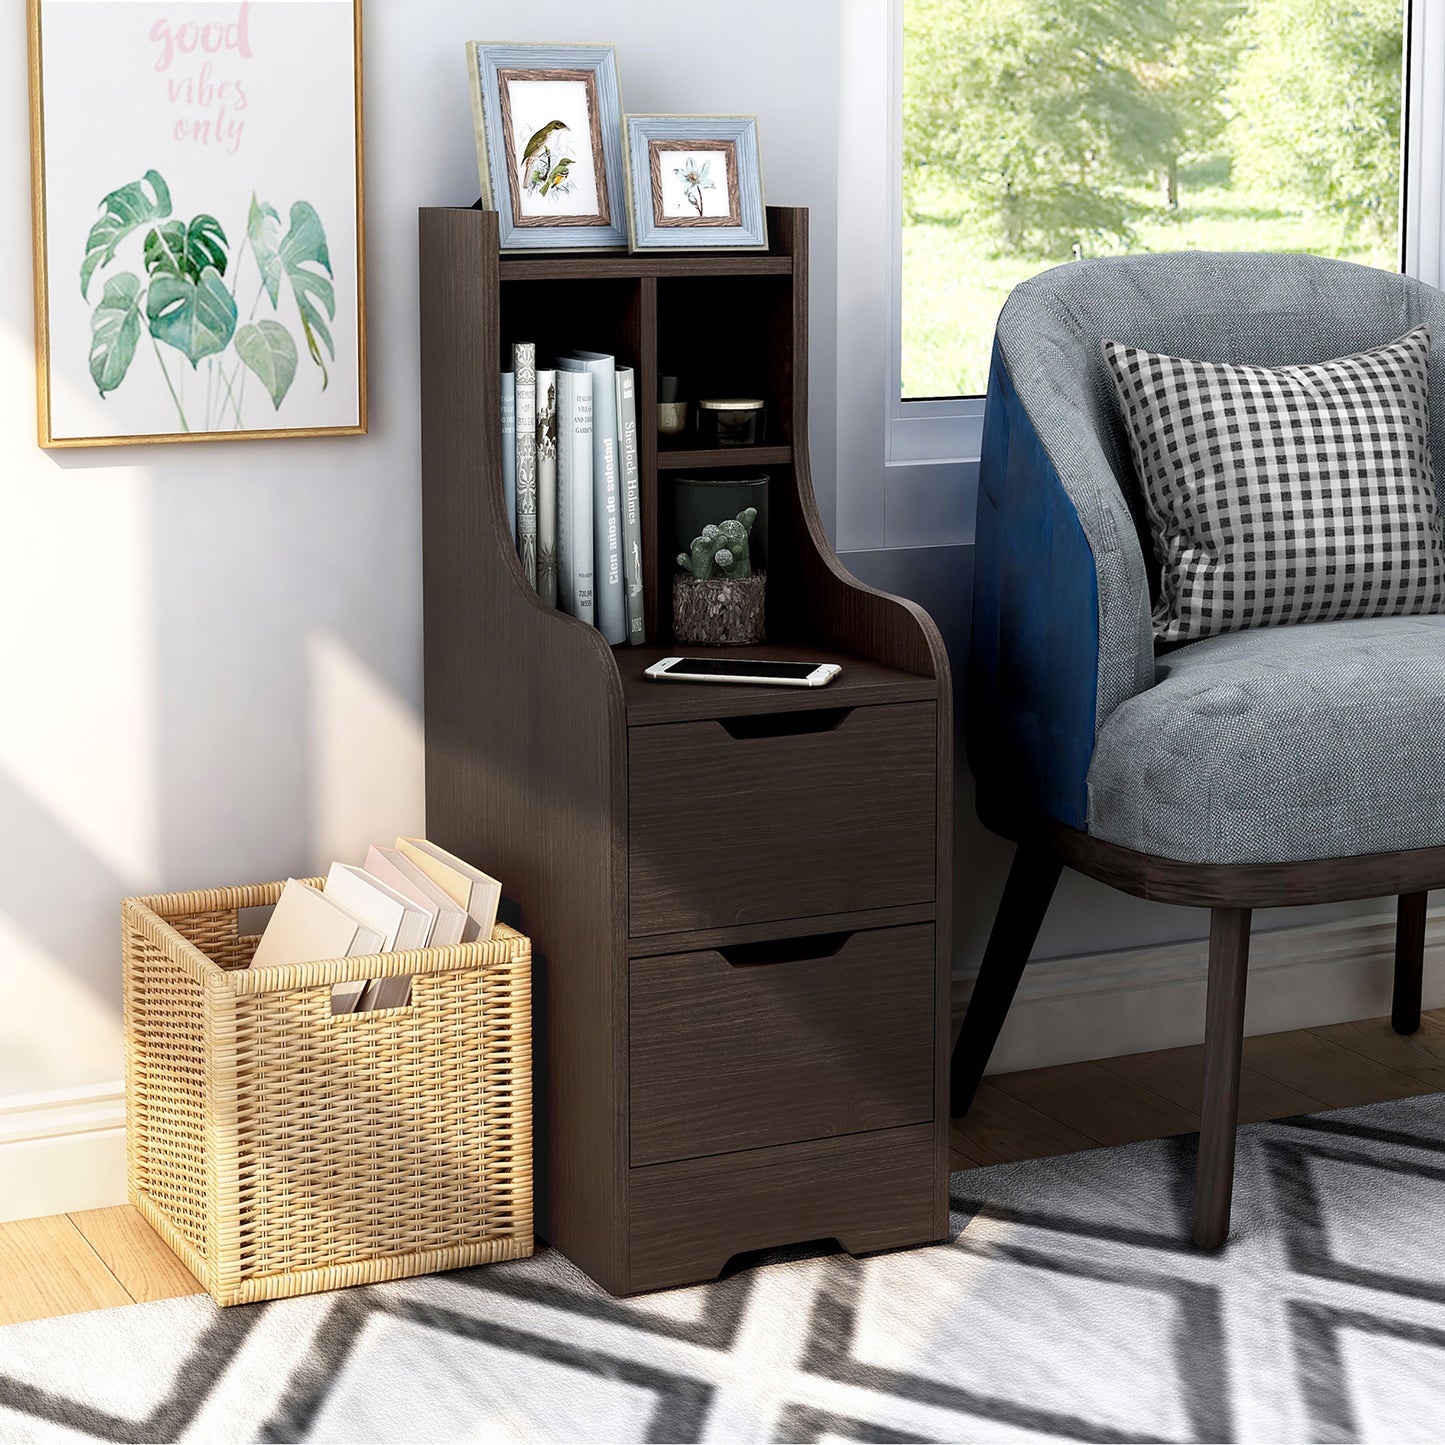 Right angled modern walnut two-drawer nightstand with shelves in a living area with accessories